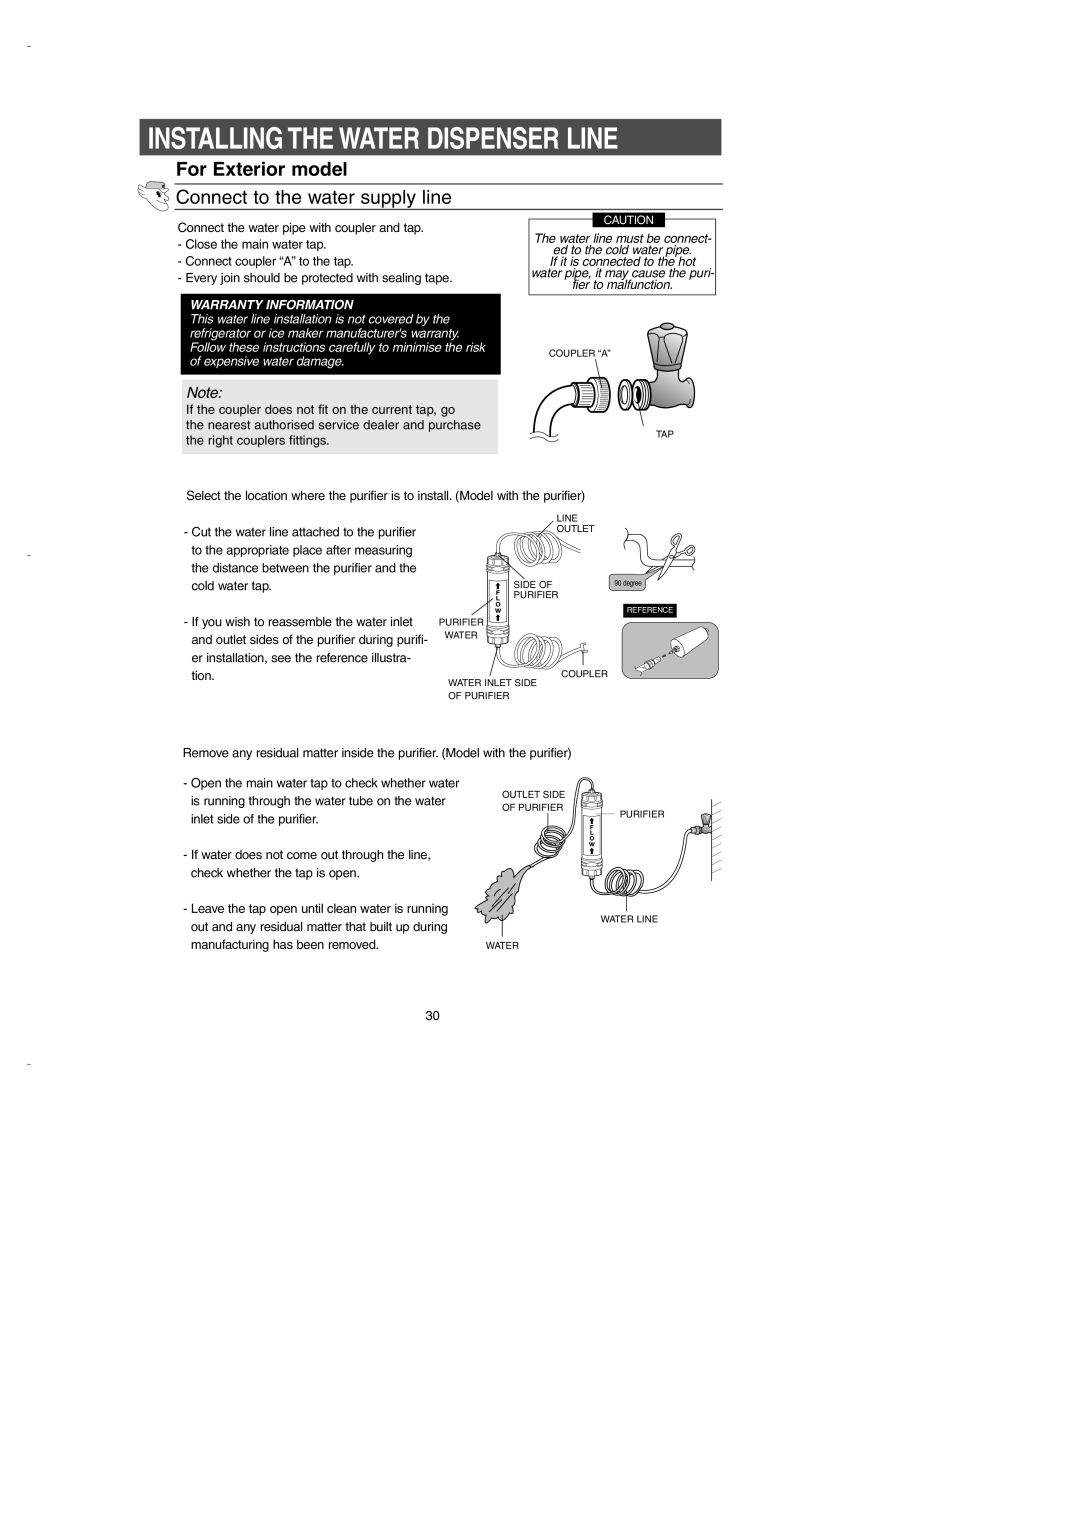 Samsung DA99-00275B owner manual For Exterior model, Connect to the water supply line, Installing The Water Dispenser Line 